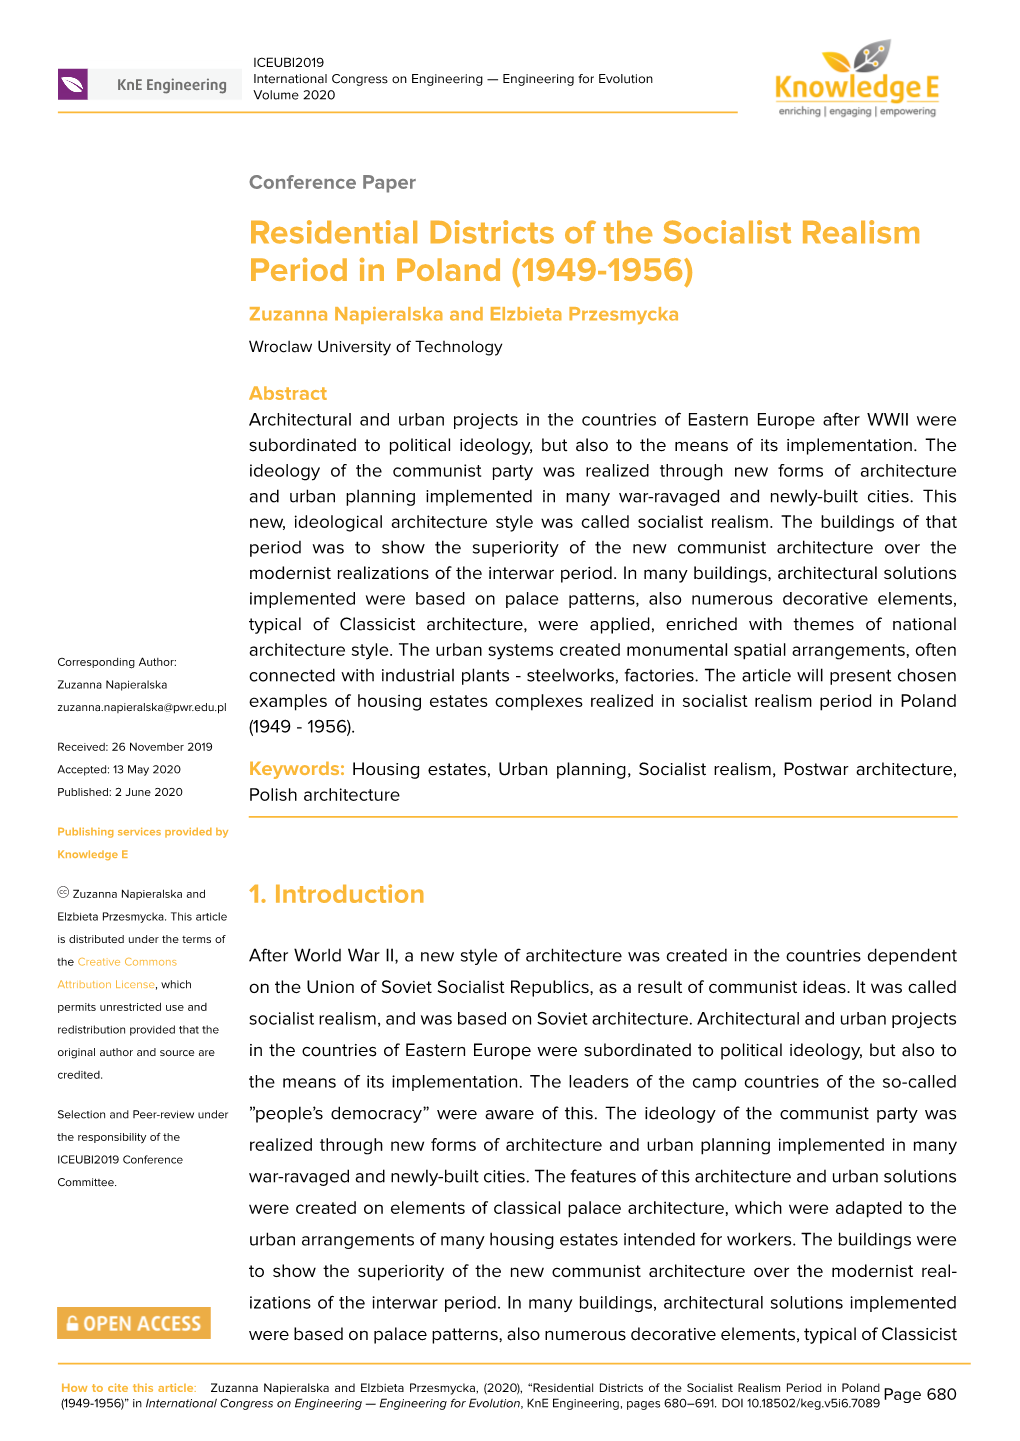 Residential Districts of the Socialist Realism Period in Poland (1949-1956) Zuzanna Napieralska and Elzbieta Przesmycka Wroclaw University of Technology